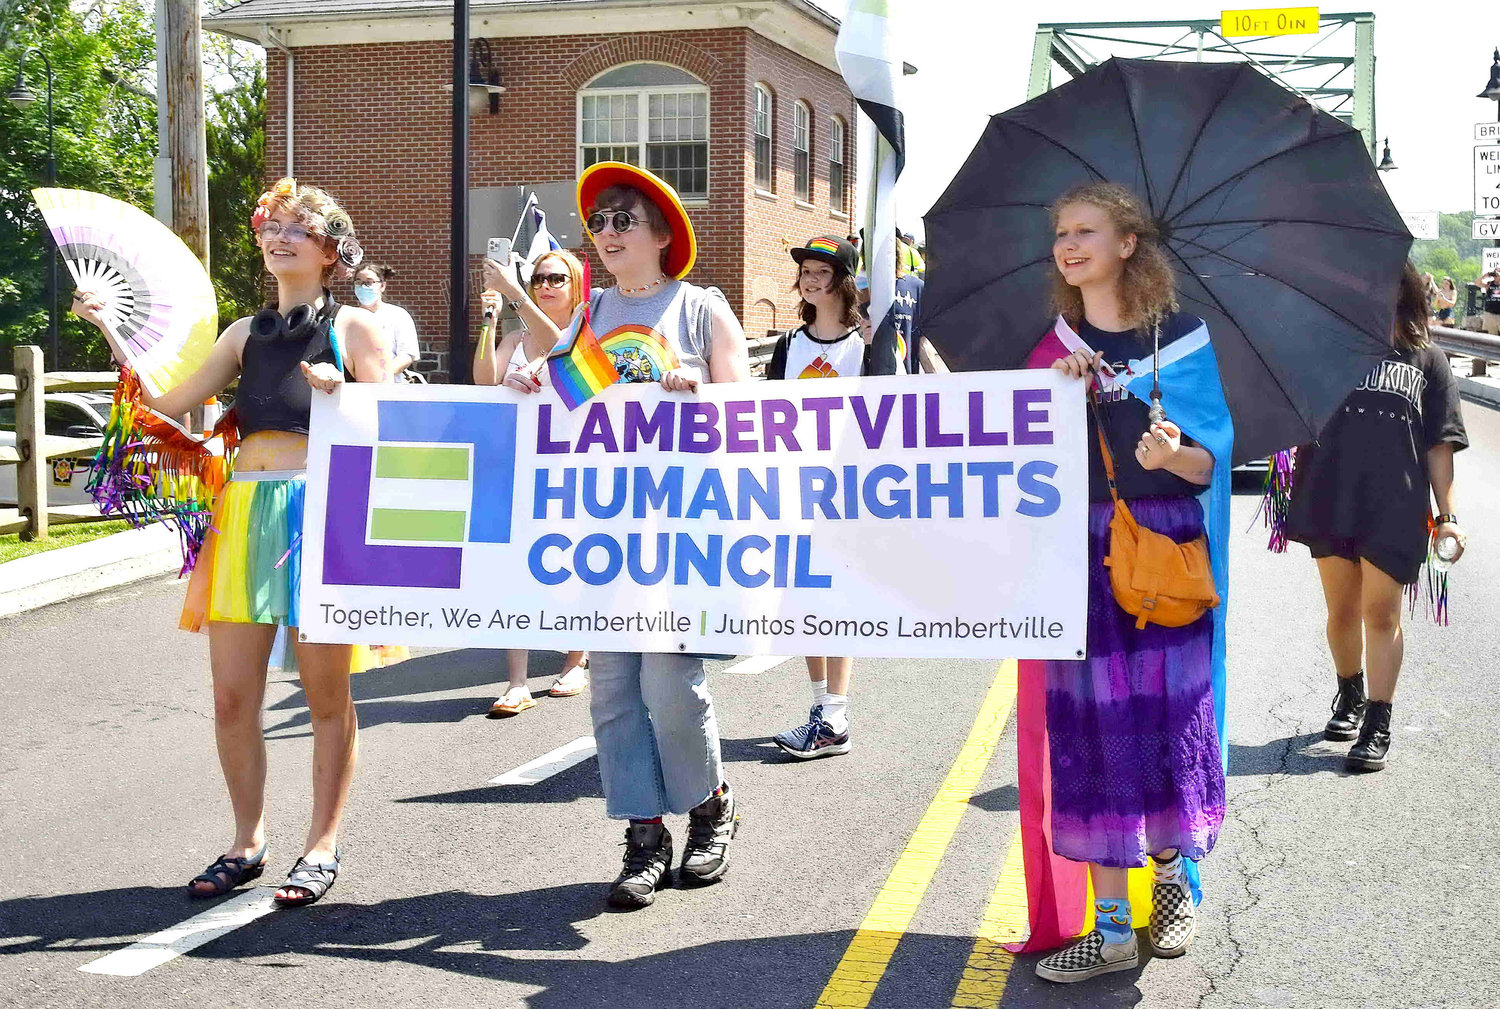 Members of the Lambertville Human Rights Council march in the parade.